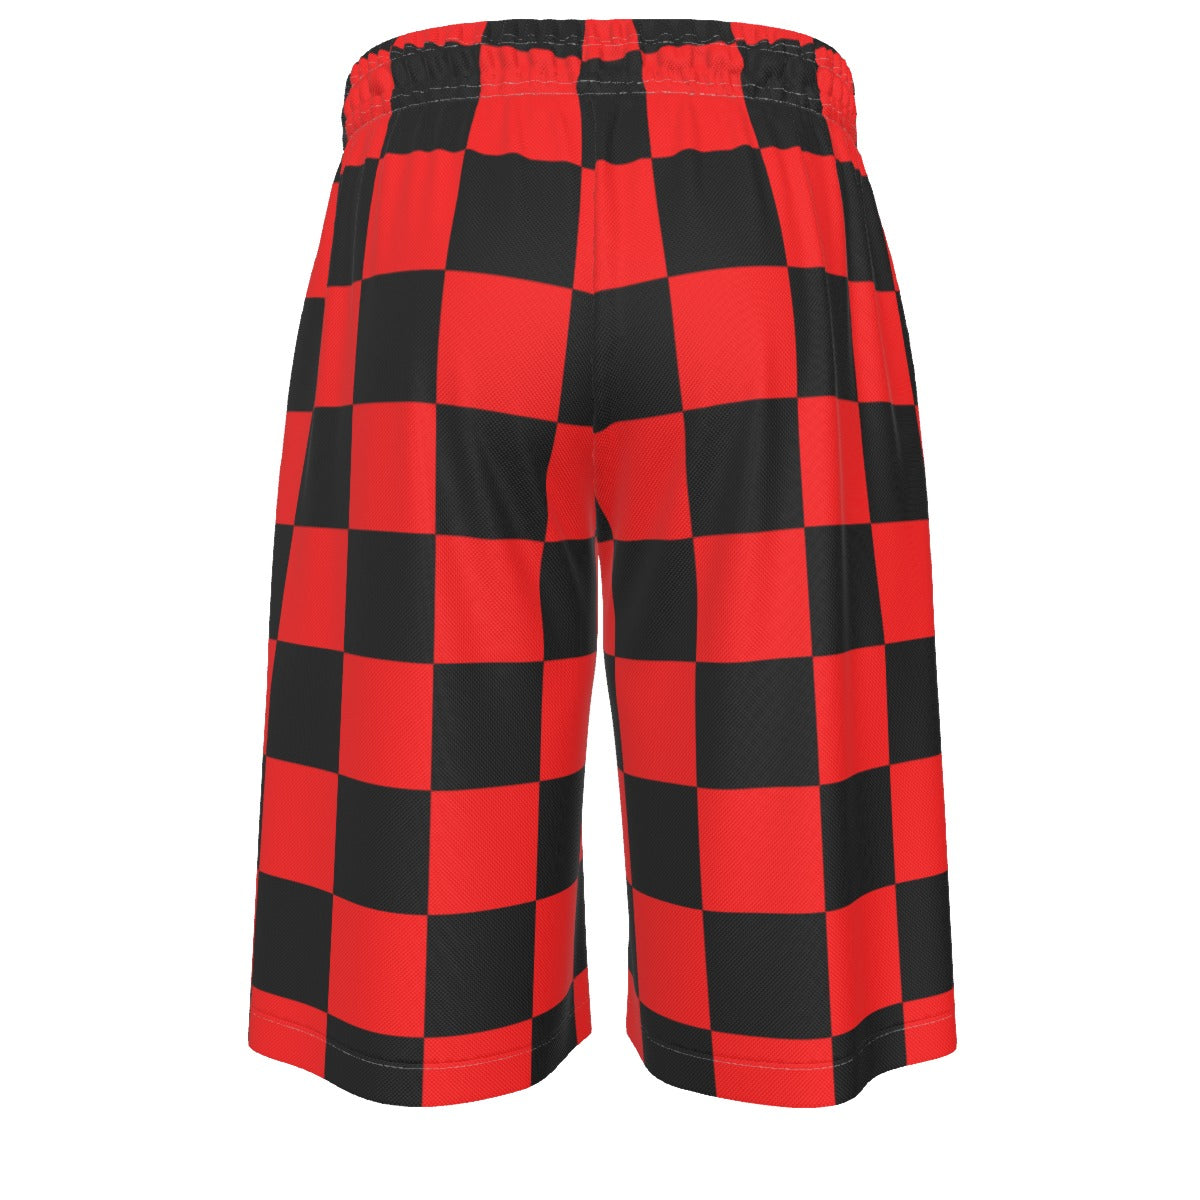 Checkerboard Men's Over-The-Knee Shorts